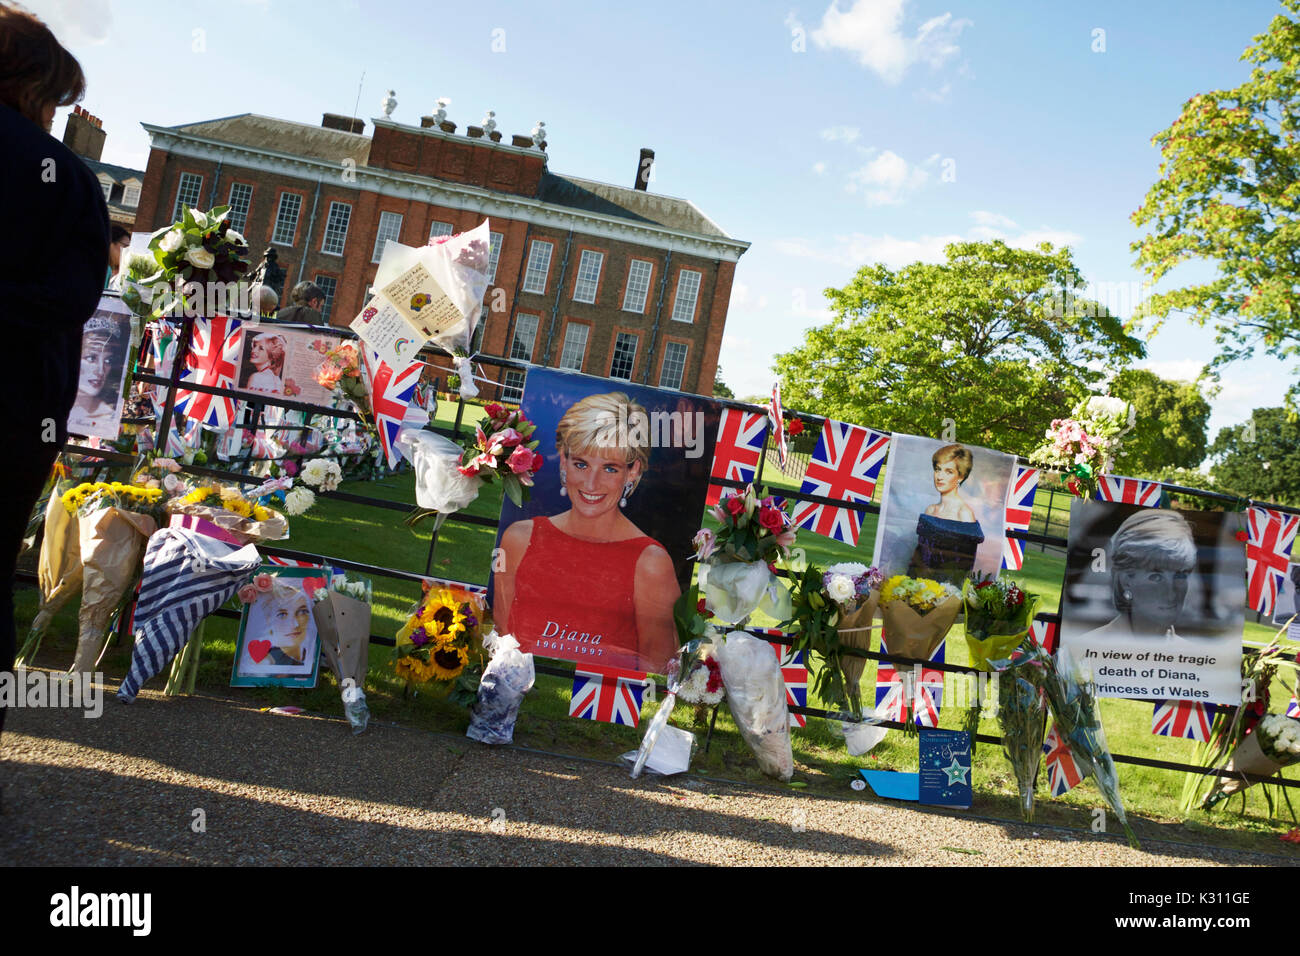 London, UK. 31 August 2017.  Tributes to Diana Princess of Wales, outside the gates of Kensington Palace, on the 20th anniversary of her death. Stock Photo